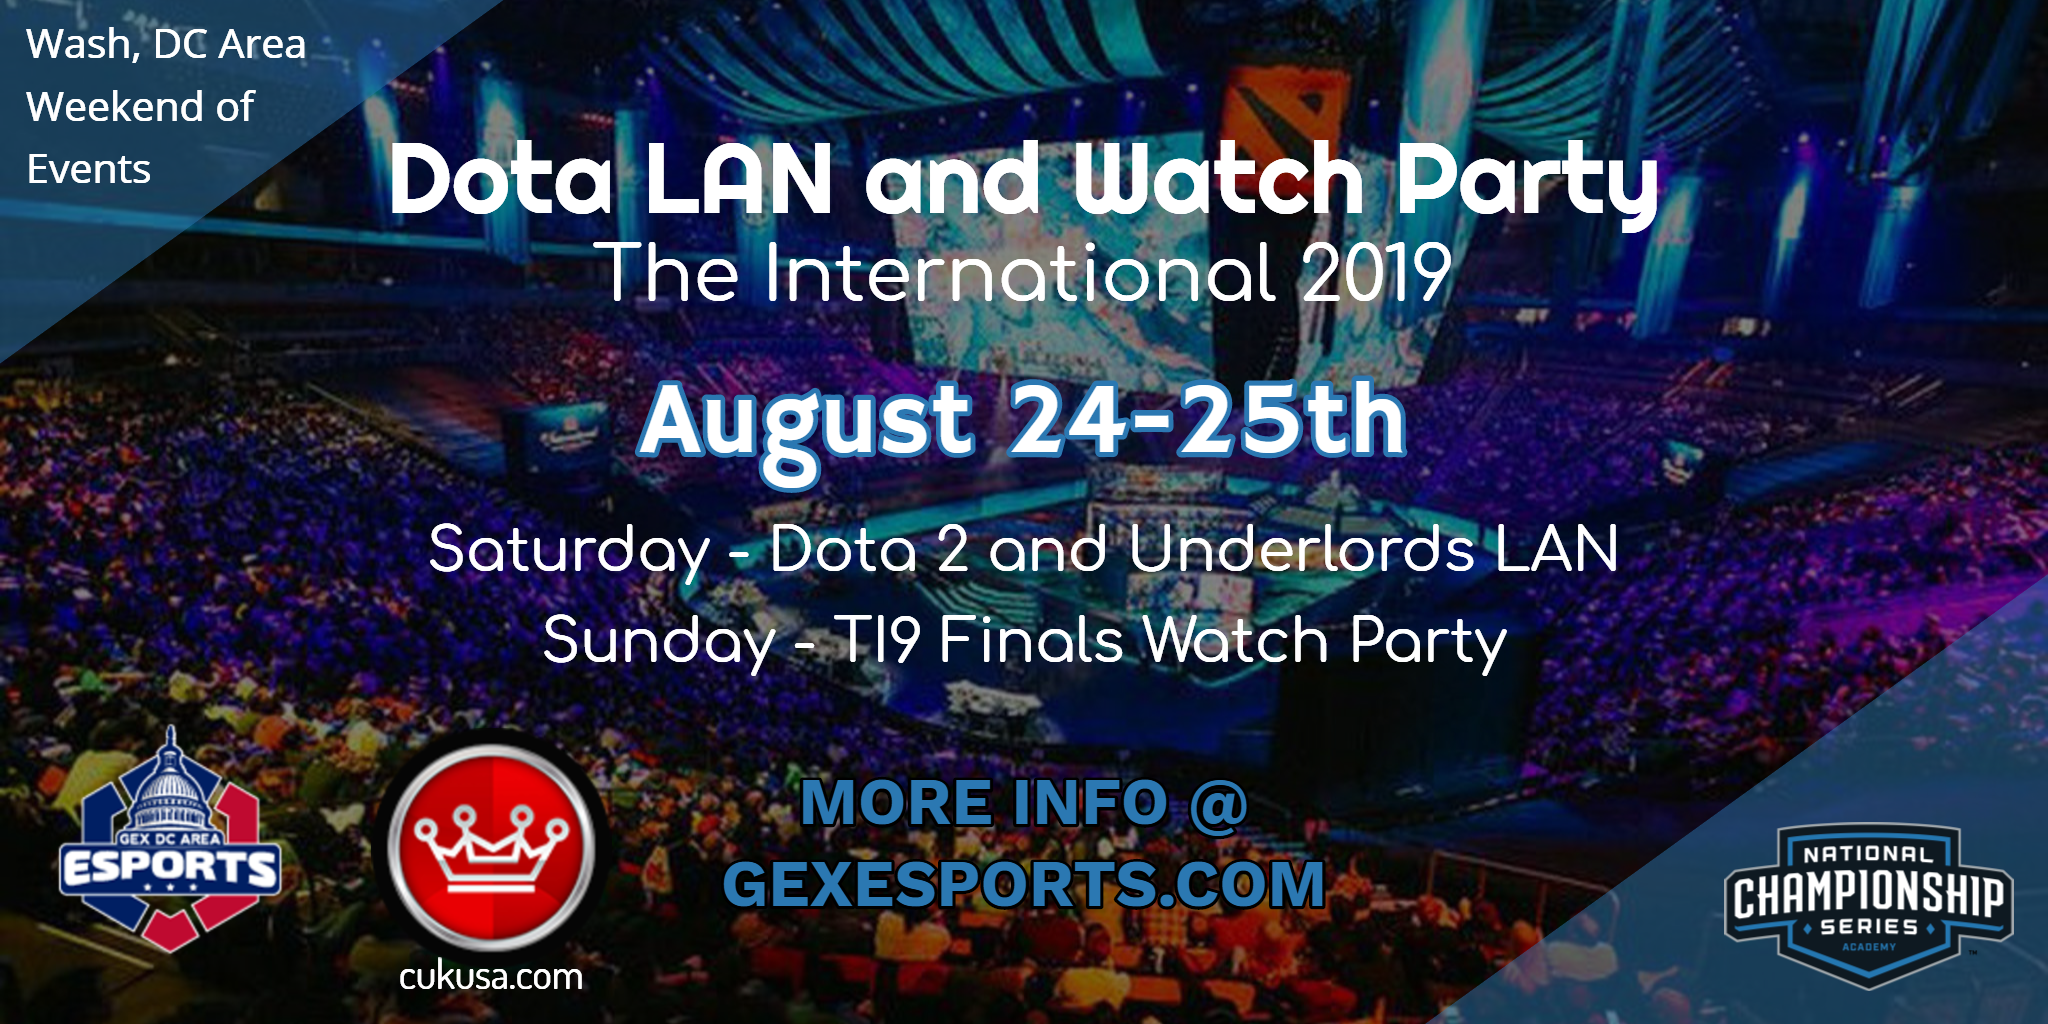 The International 2019 Weekend - Dota2/Underlords LAN and TI9 Finals Watch Party